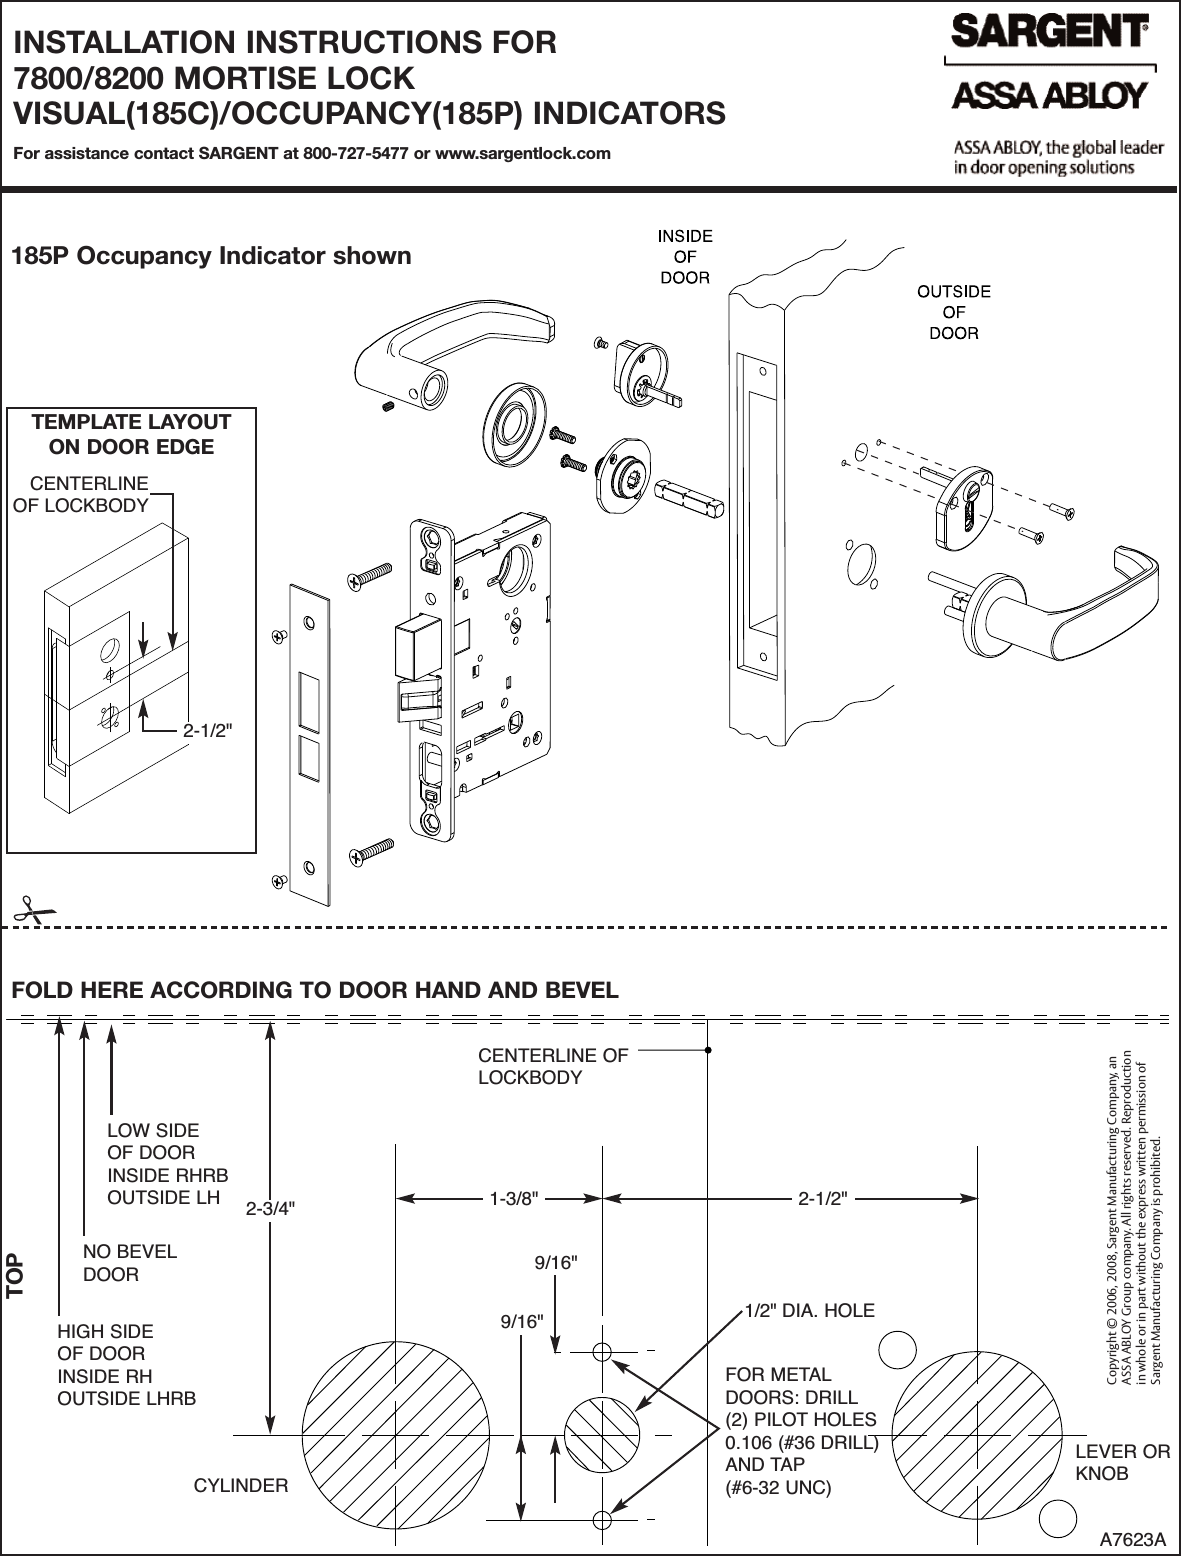 Page 1 of 2 - Sargent 45066 CR ED6000 INSTALLATION INSTRUCTIONS FOR 7800/8200 MORTISE LOCK 8200installation